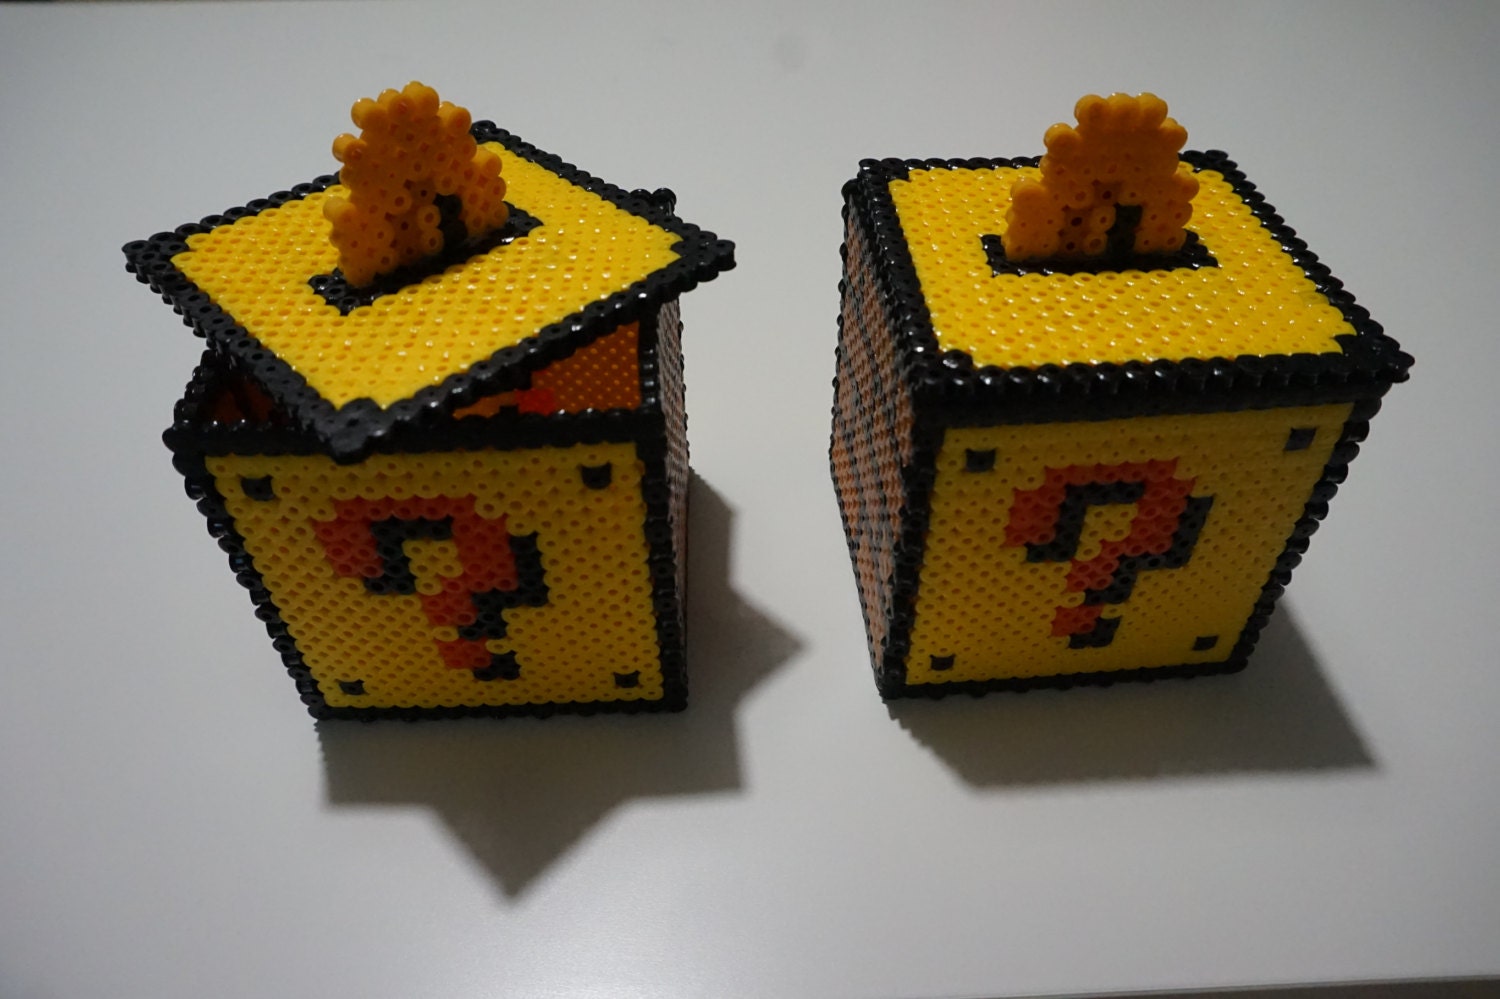 Mario Coin Box by PausexRewind on Etsy